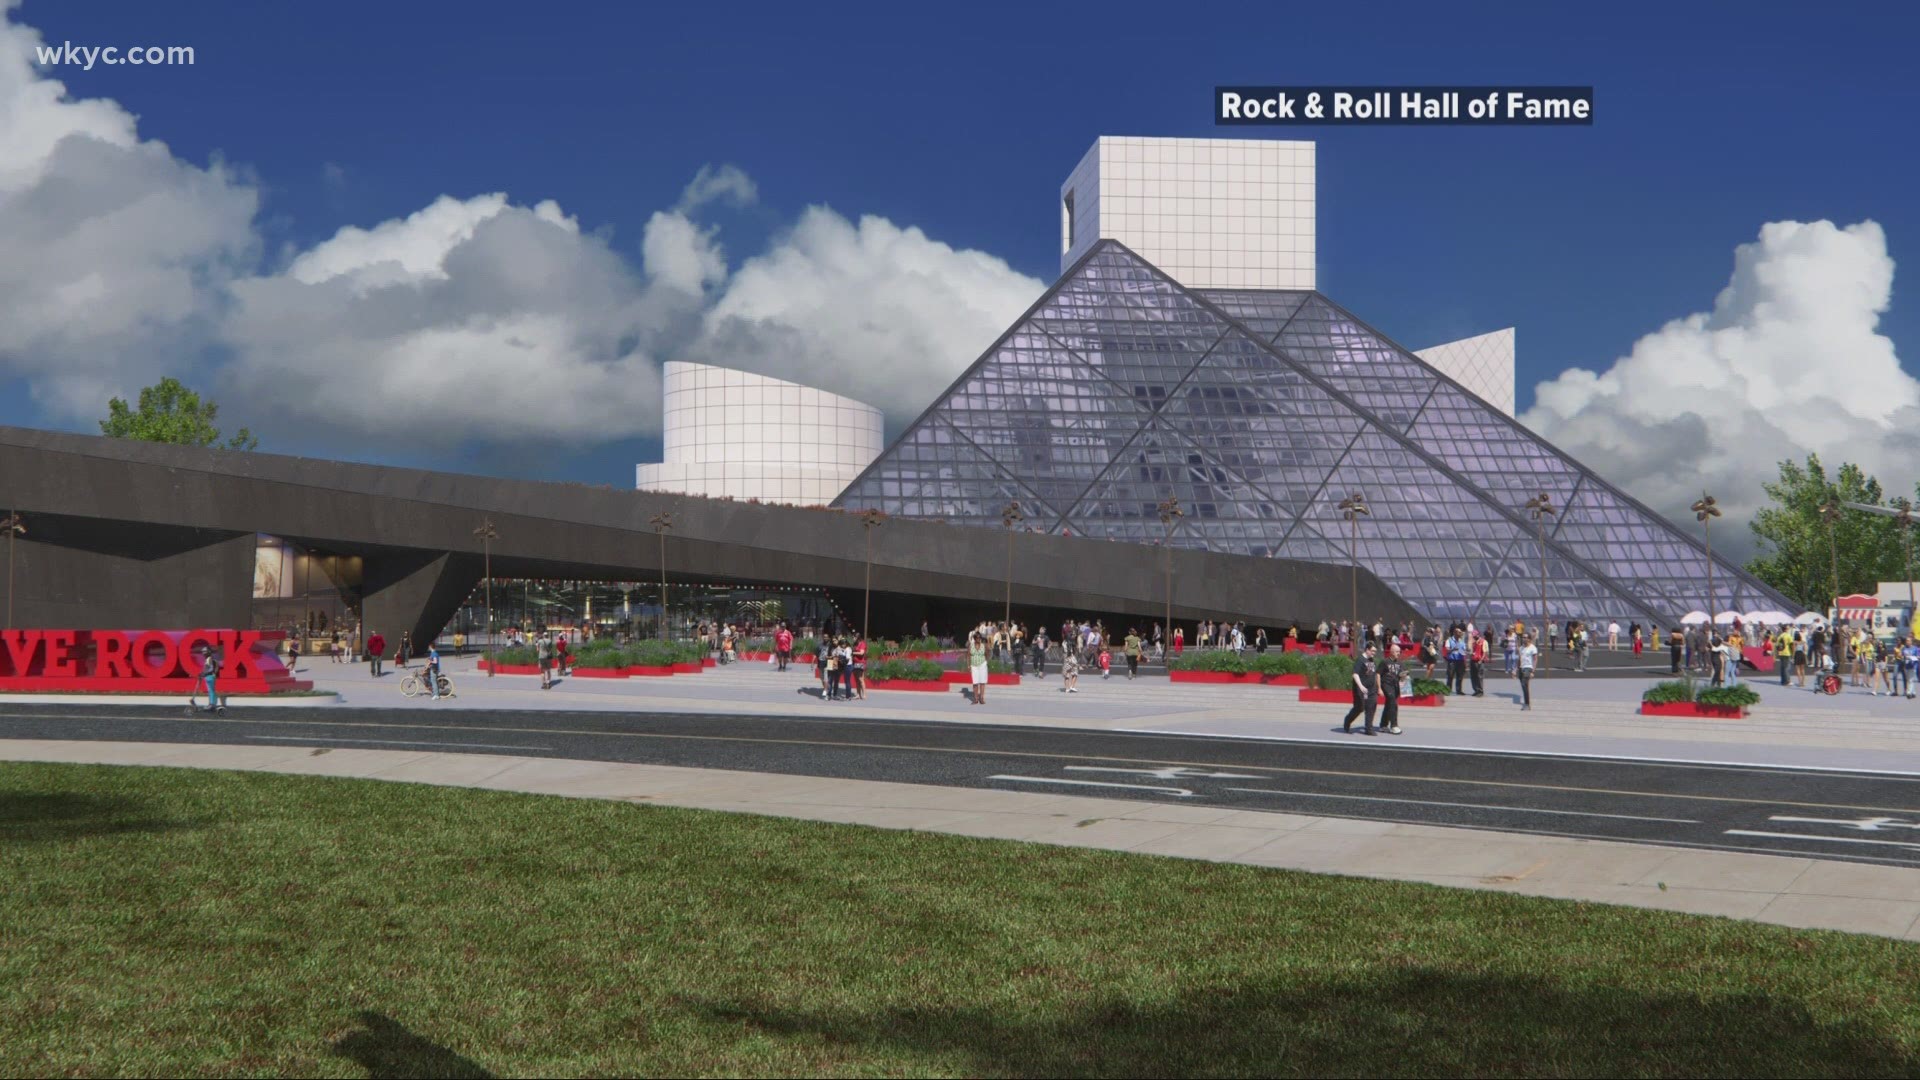 The Rock & Roll Hall of Fame announced Friday that they will be undergoing a major expansion. Andrew Horansky has the details.